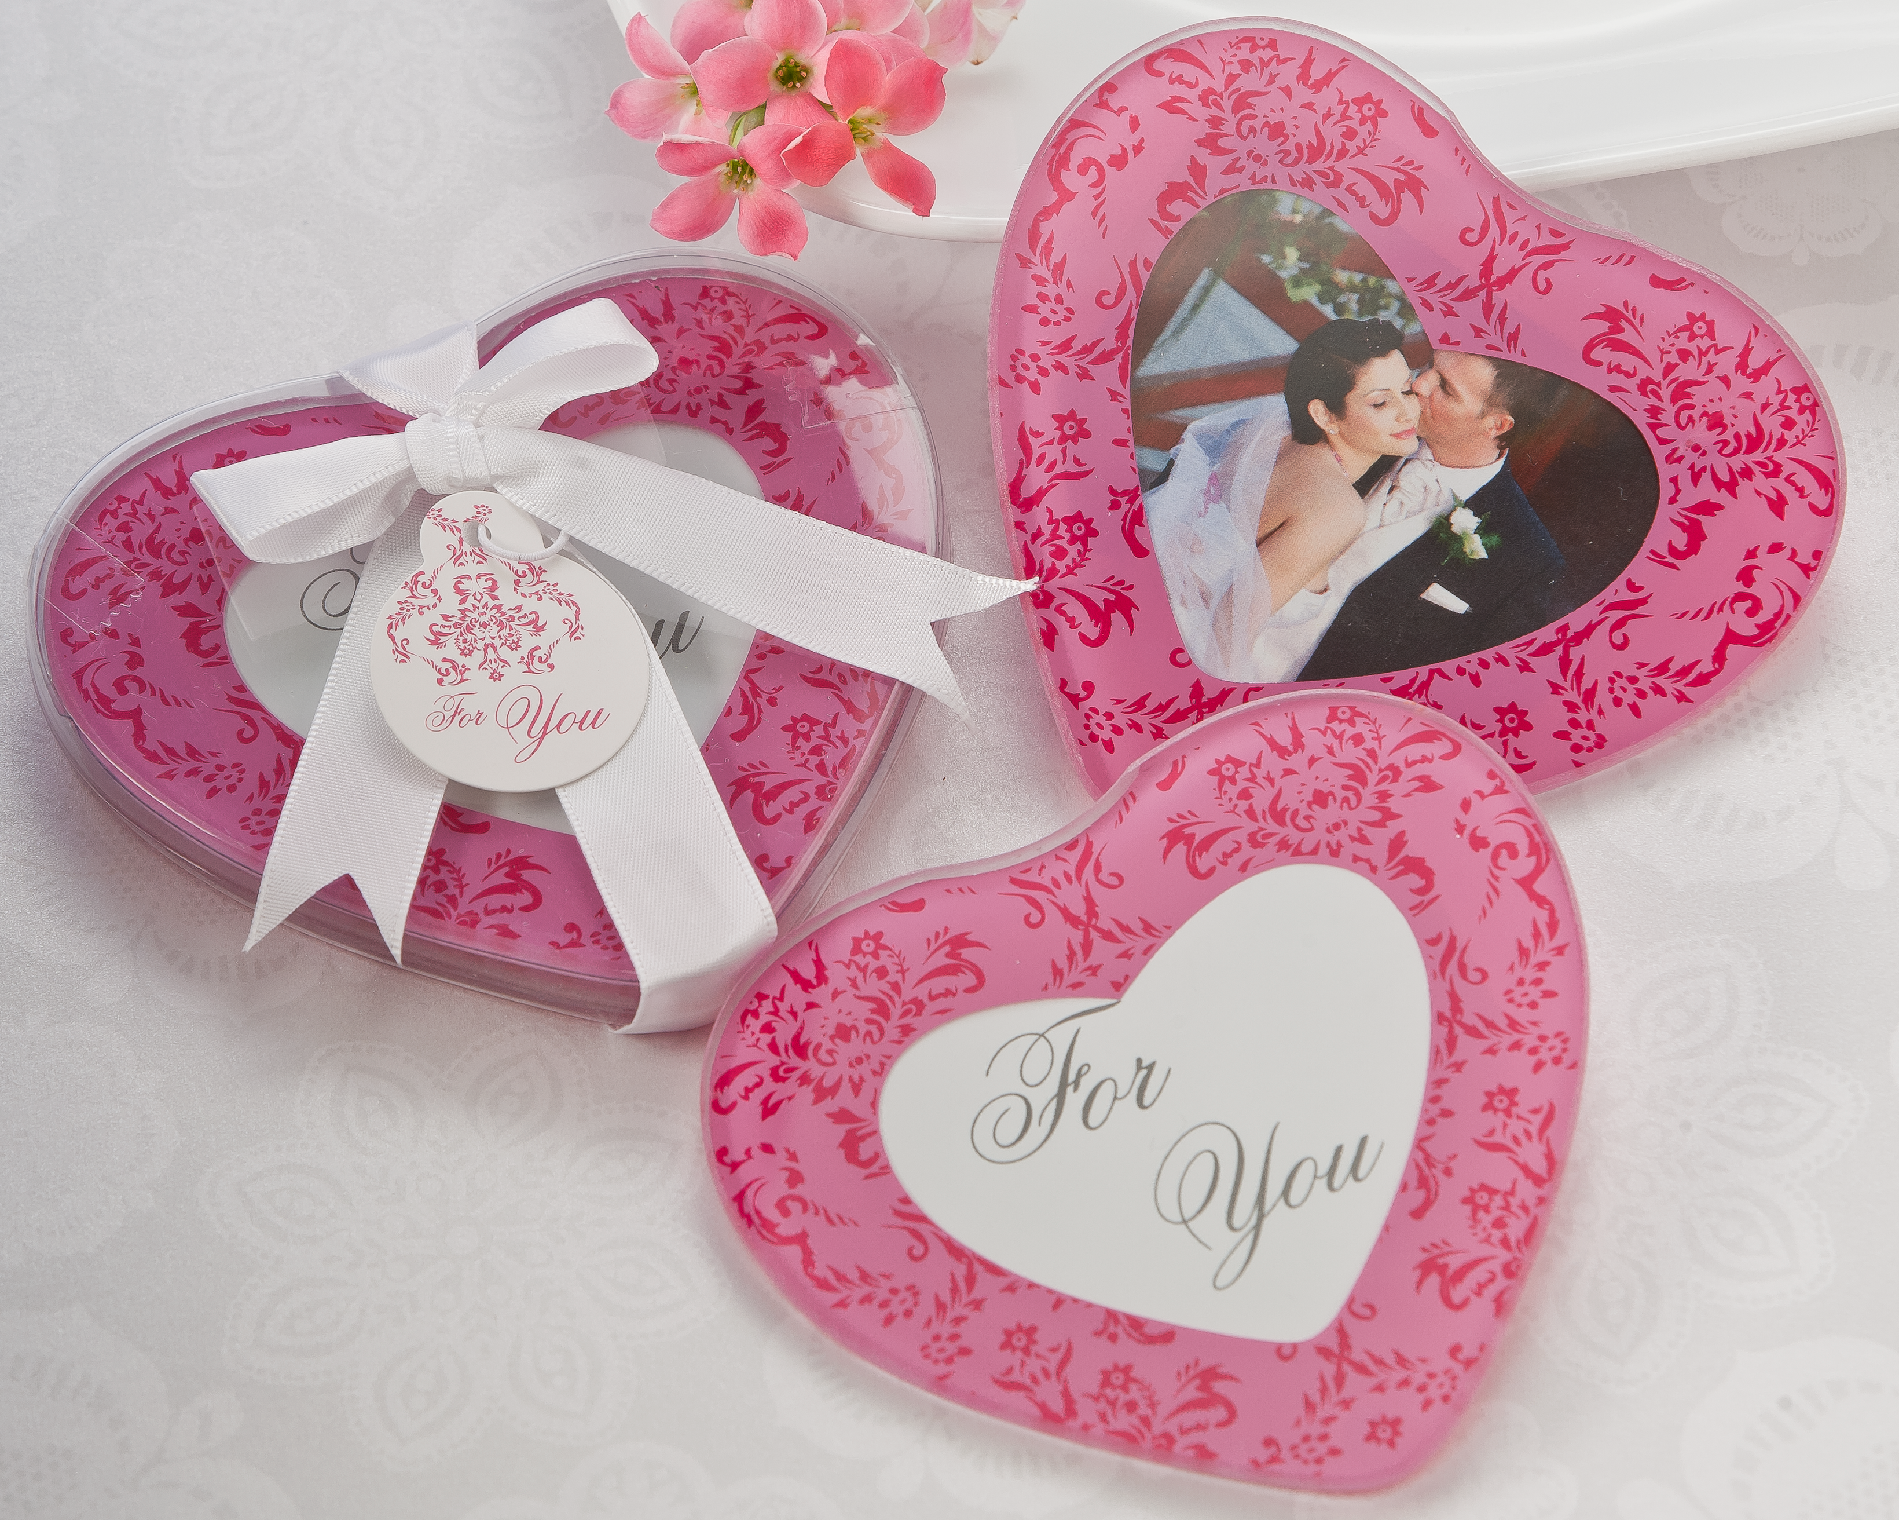 "Pretty in Pink" Heart Glass Photo Coasters (Set of 2) [Case Pack of 100]